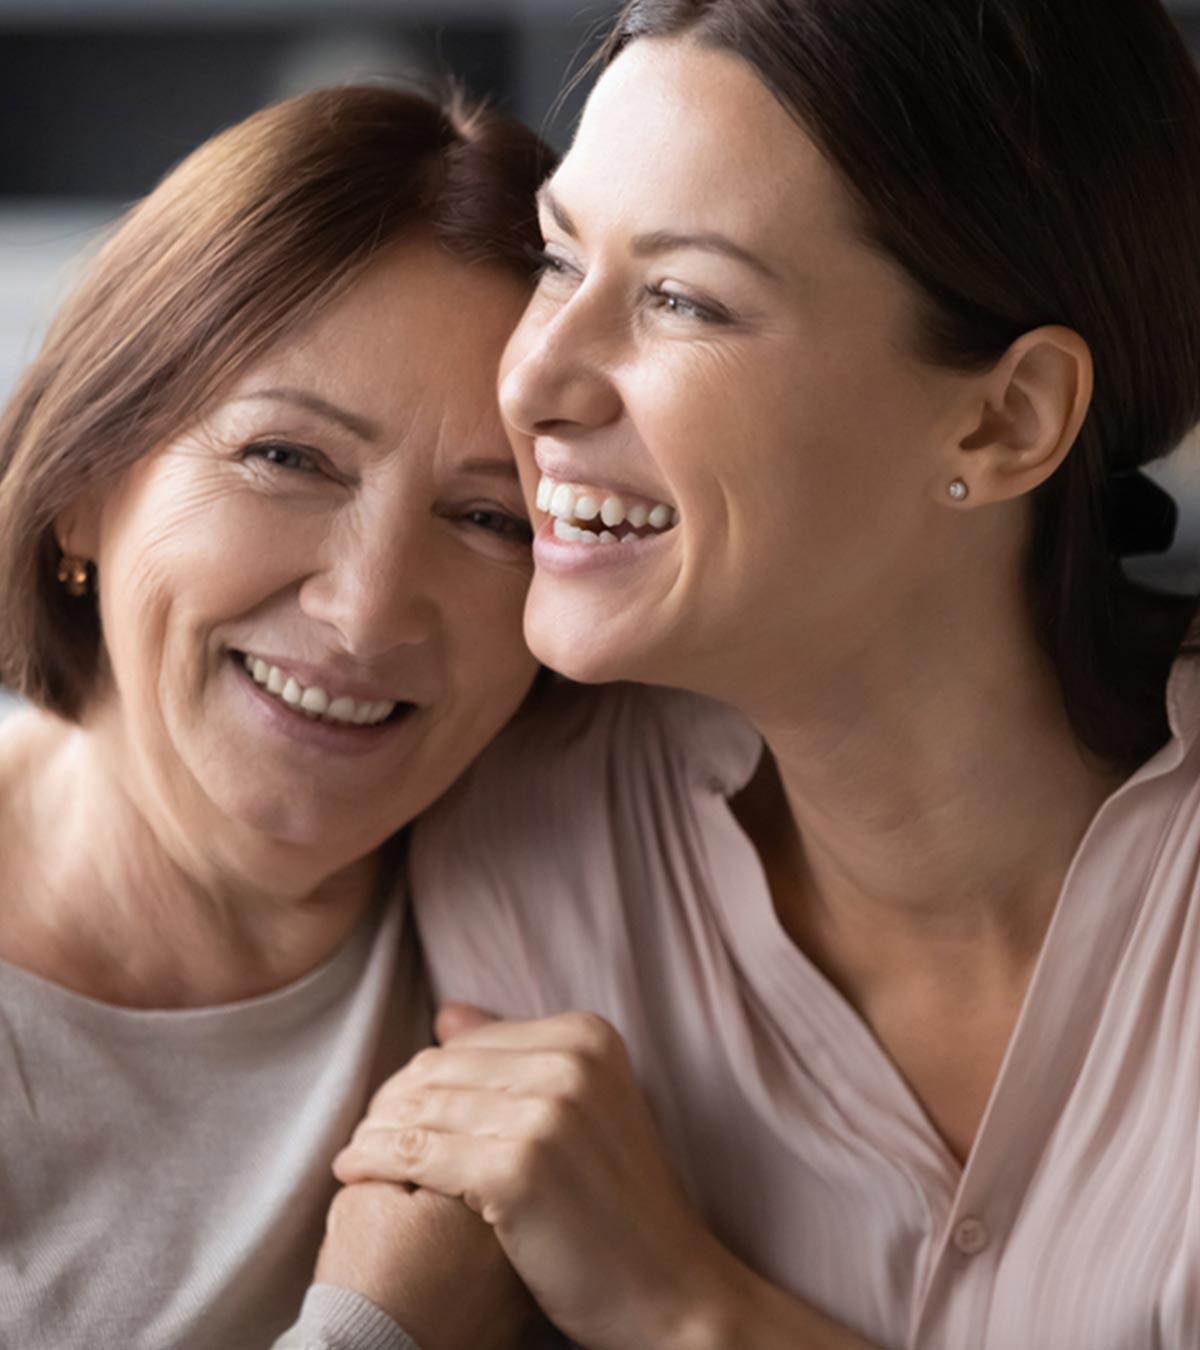 75 Sweet Things To Say To Your Mom To Make Her Smile